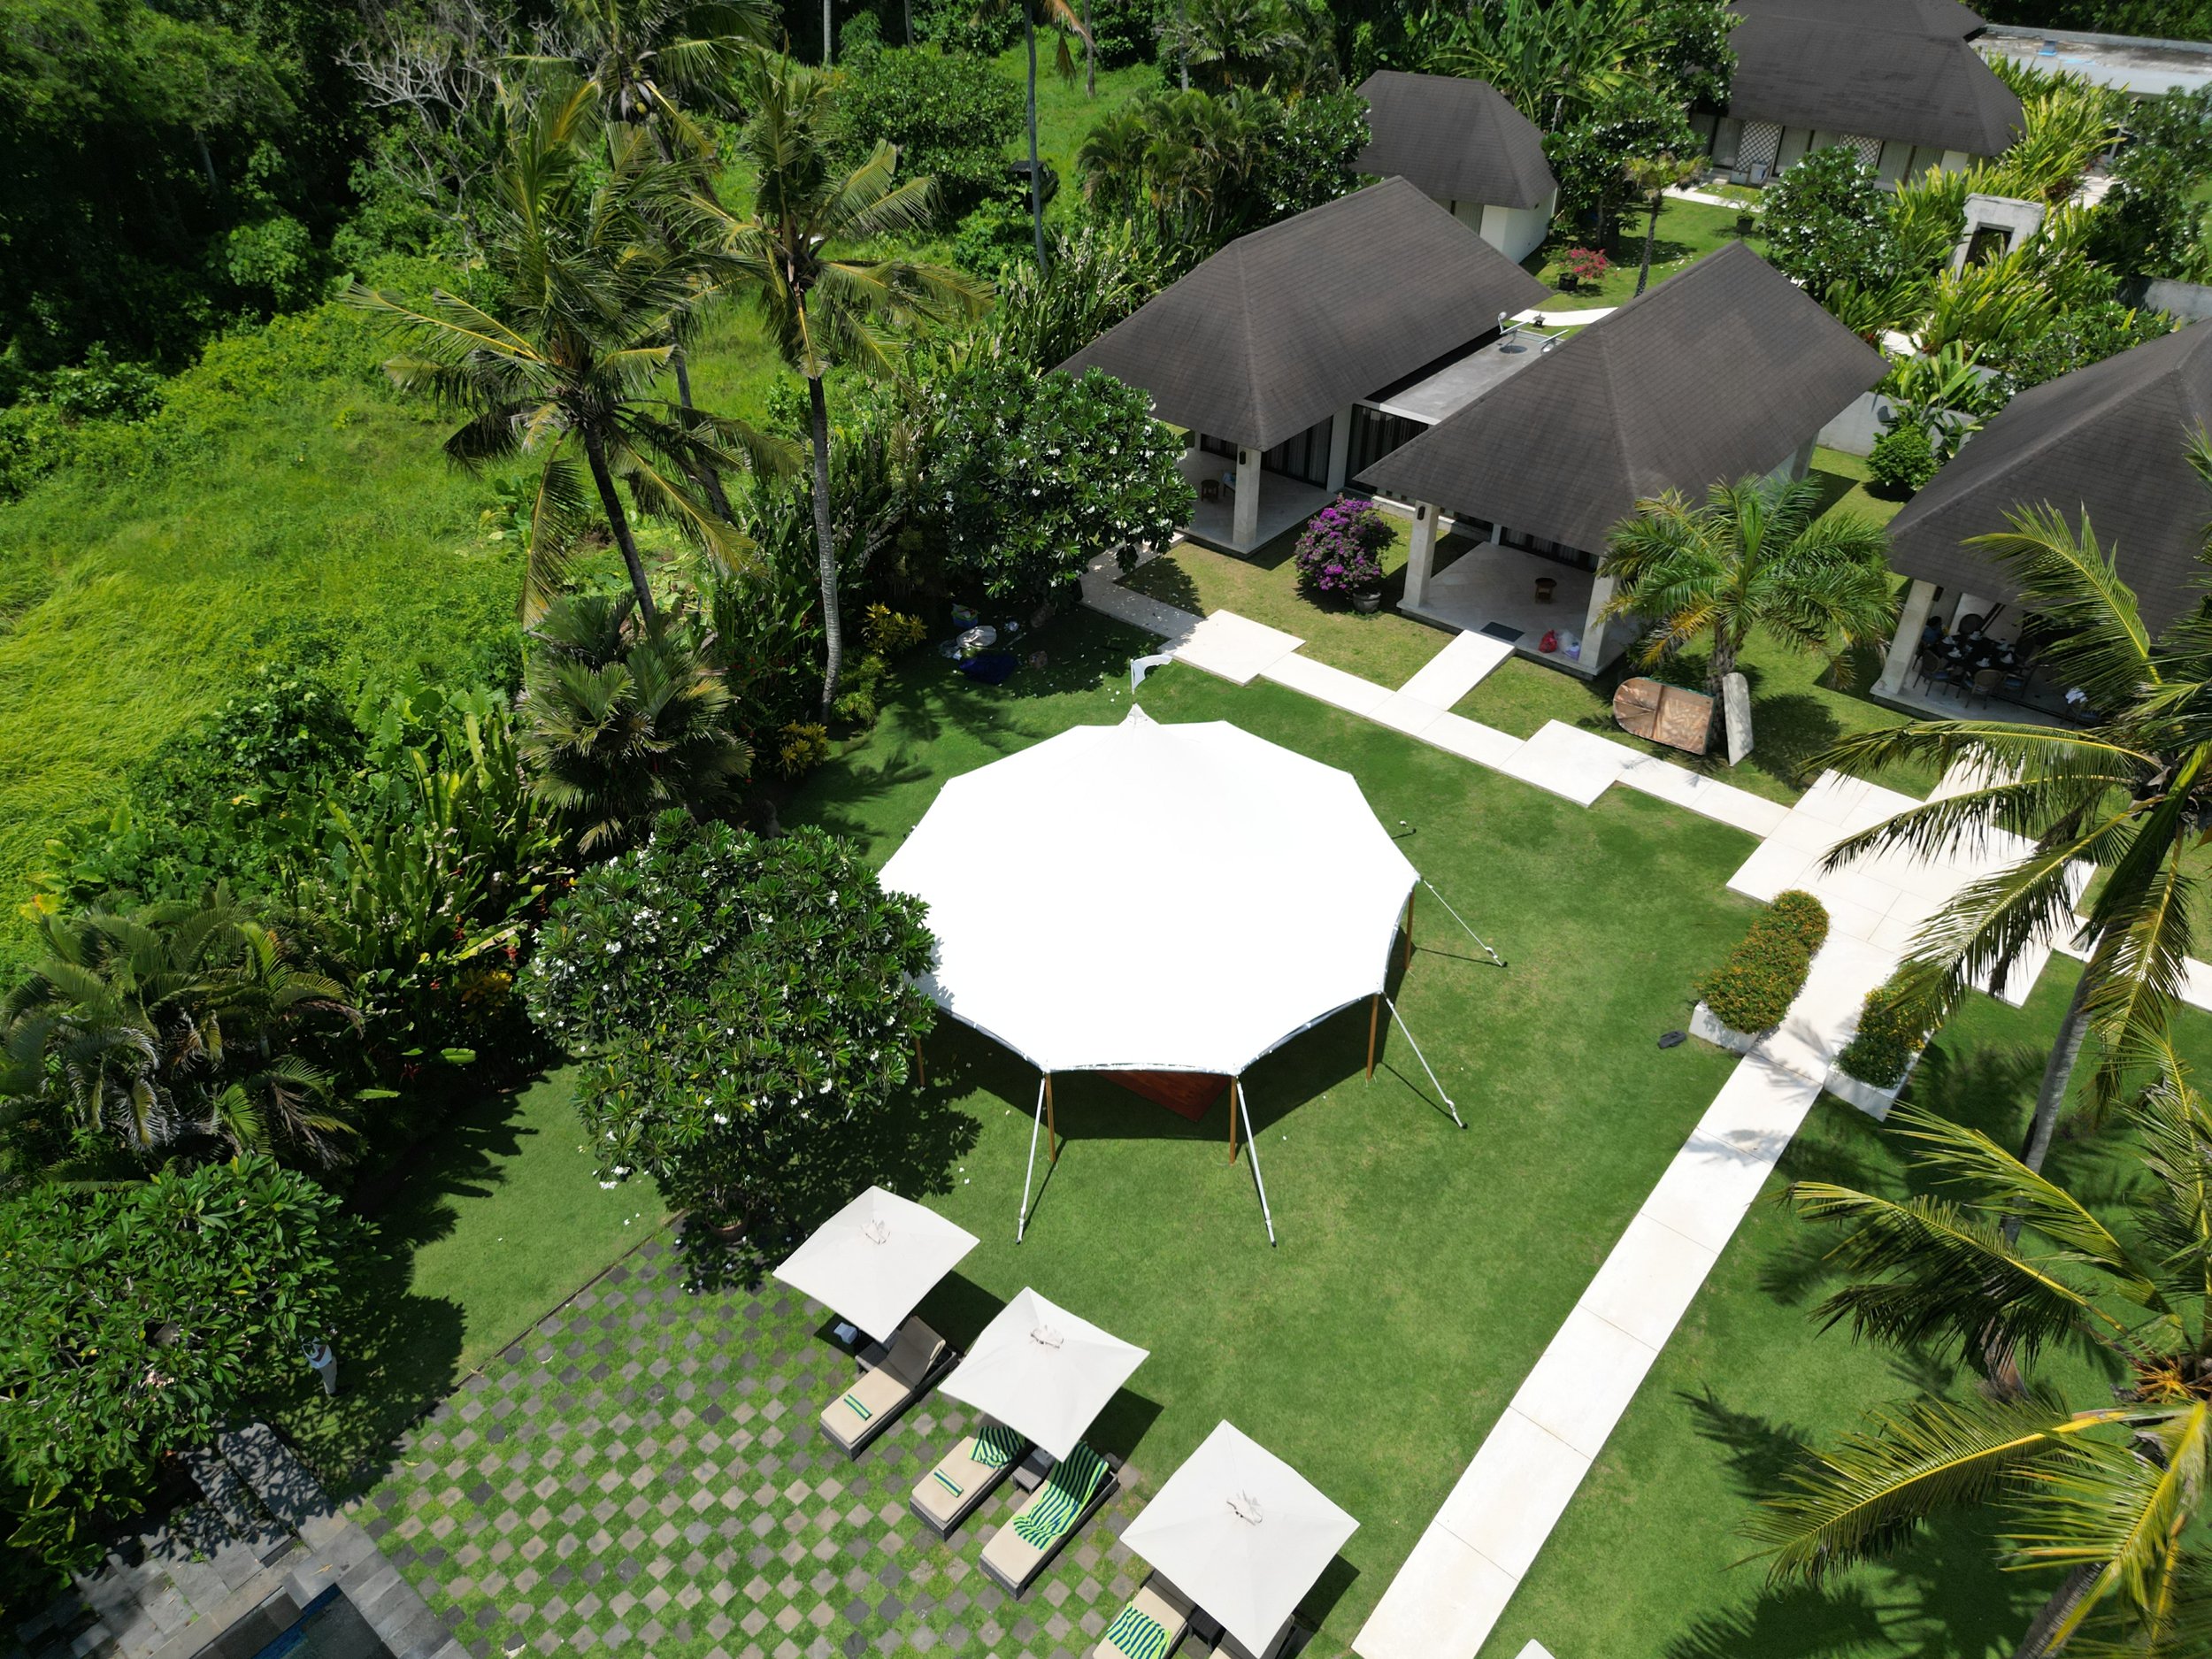 Overview of Villa Kailasha, Image from A Tent in Bali